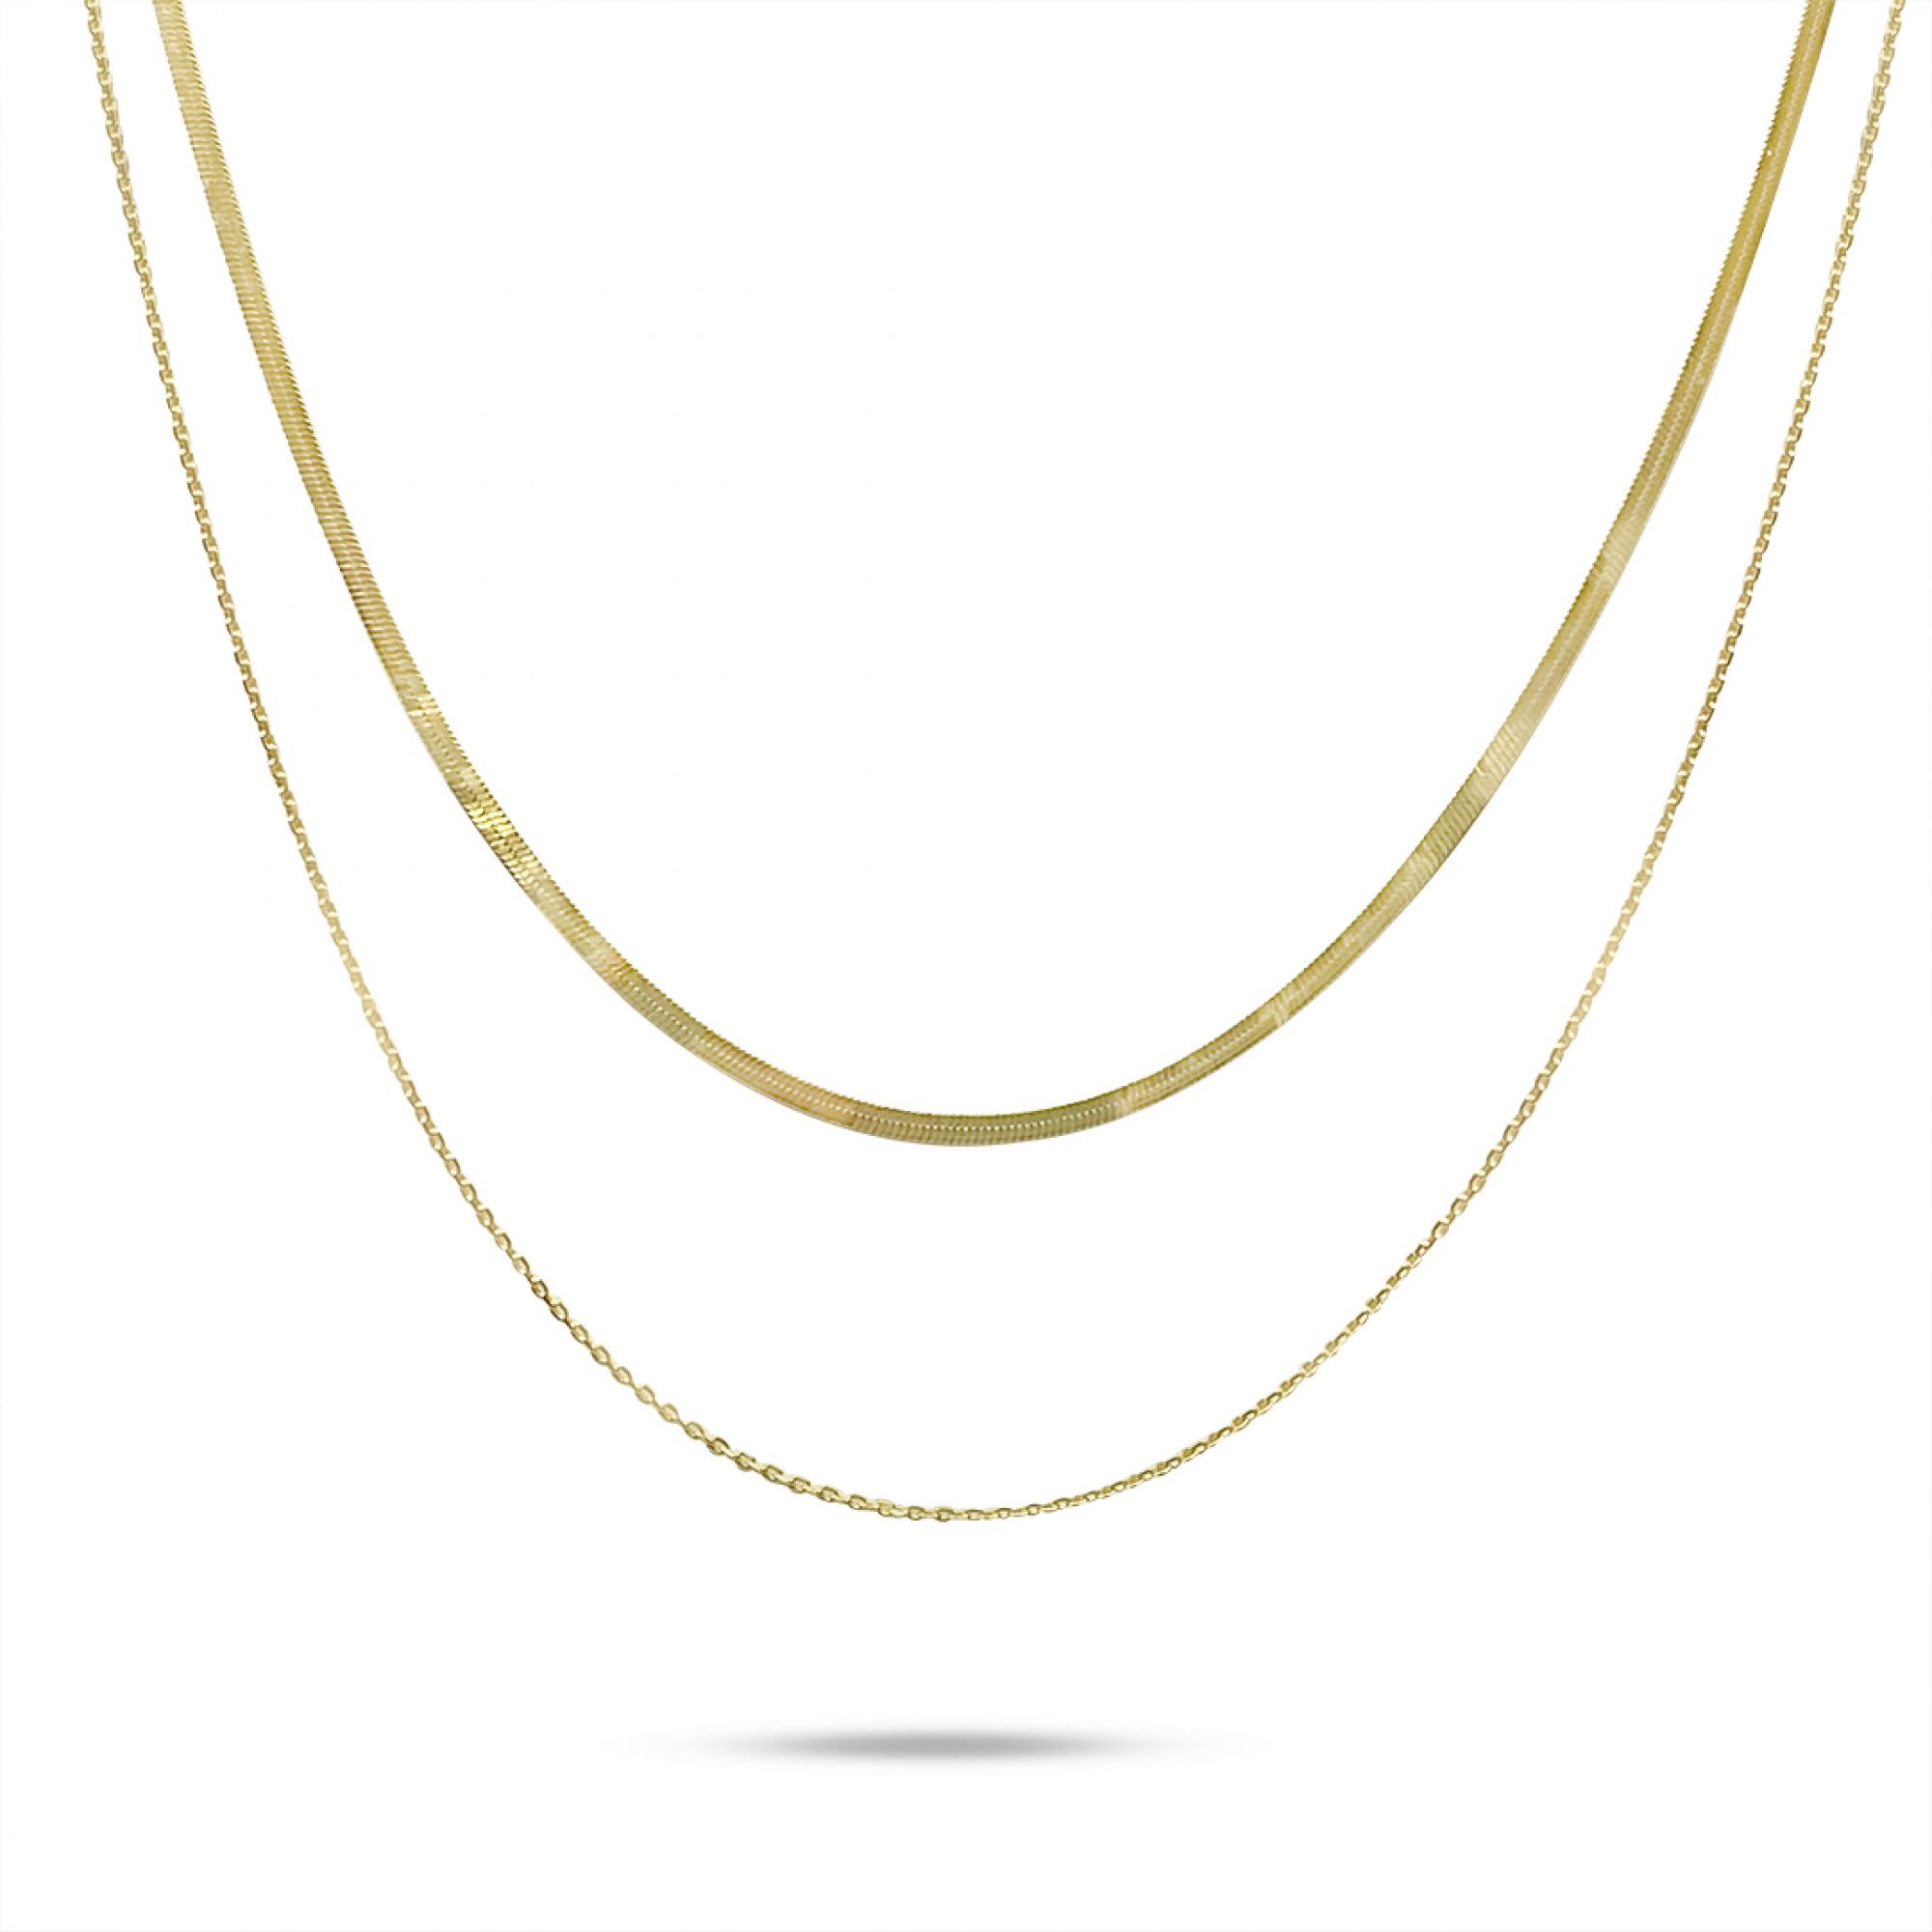 Double gold plated chain necklace